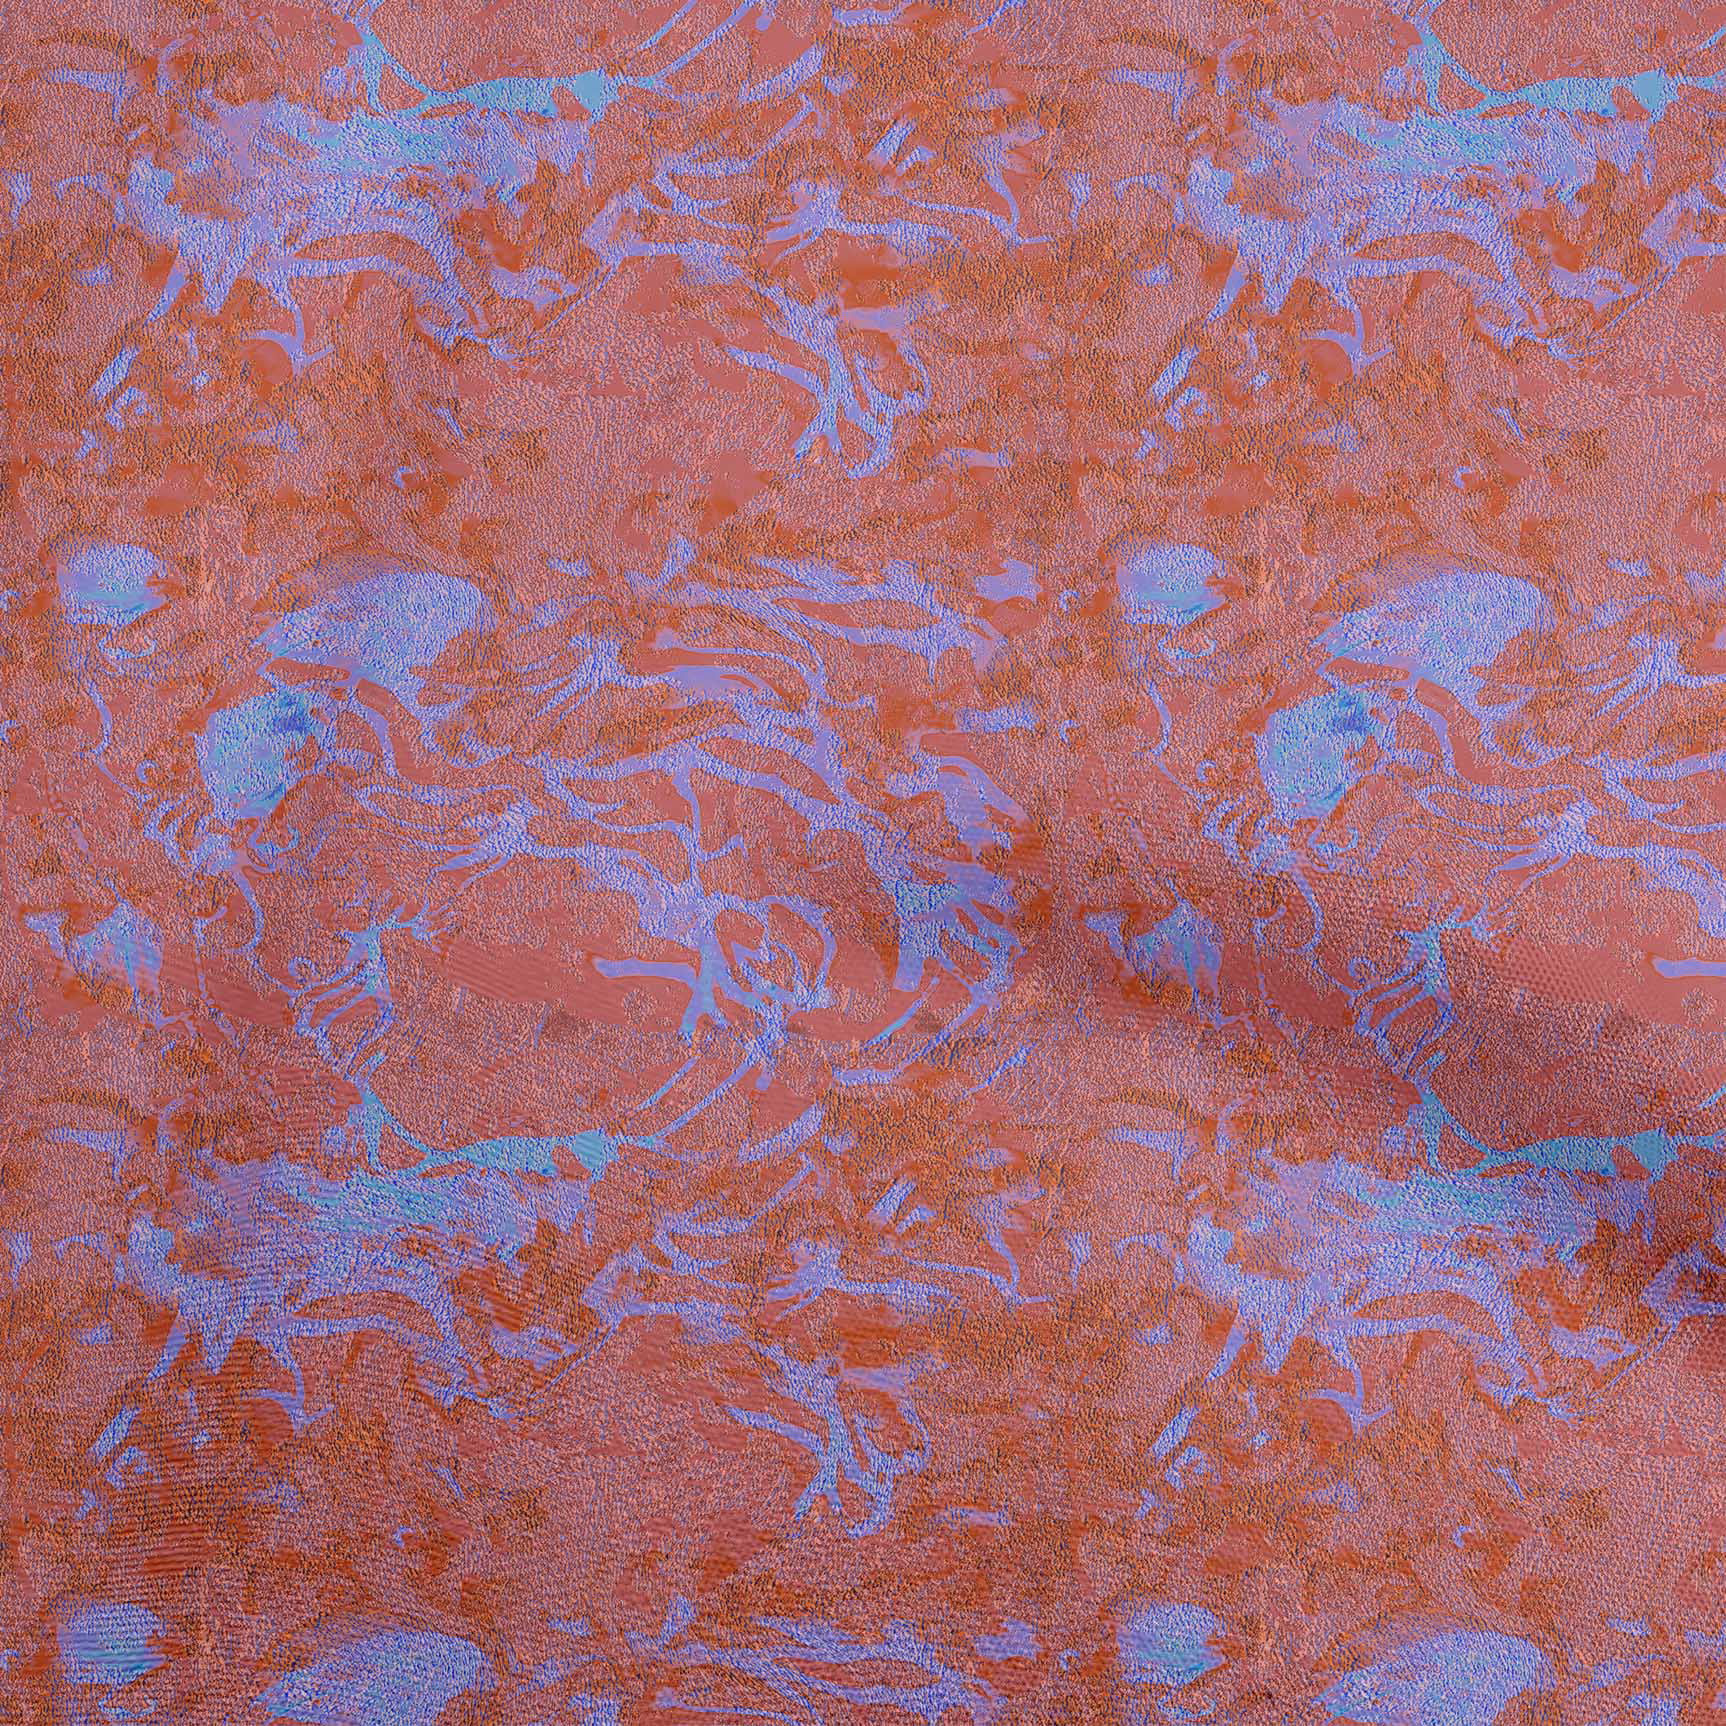  oneOone Cotton Silk Orange Fabric Abstracts Sewing Fabric by  The Yard Printed DIY Clothing Sewing Supplies 42 Inch Wide-19 : Everything  Else